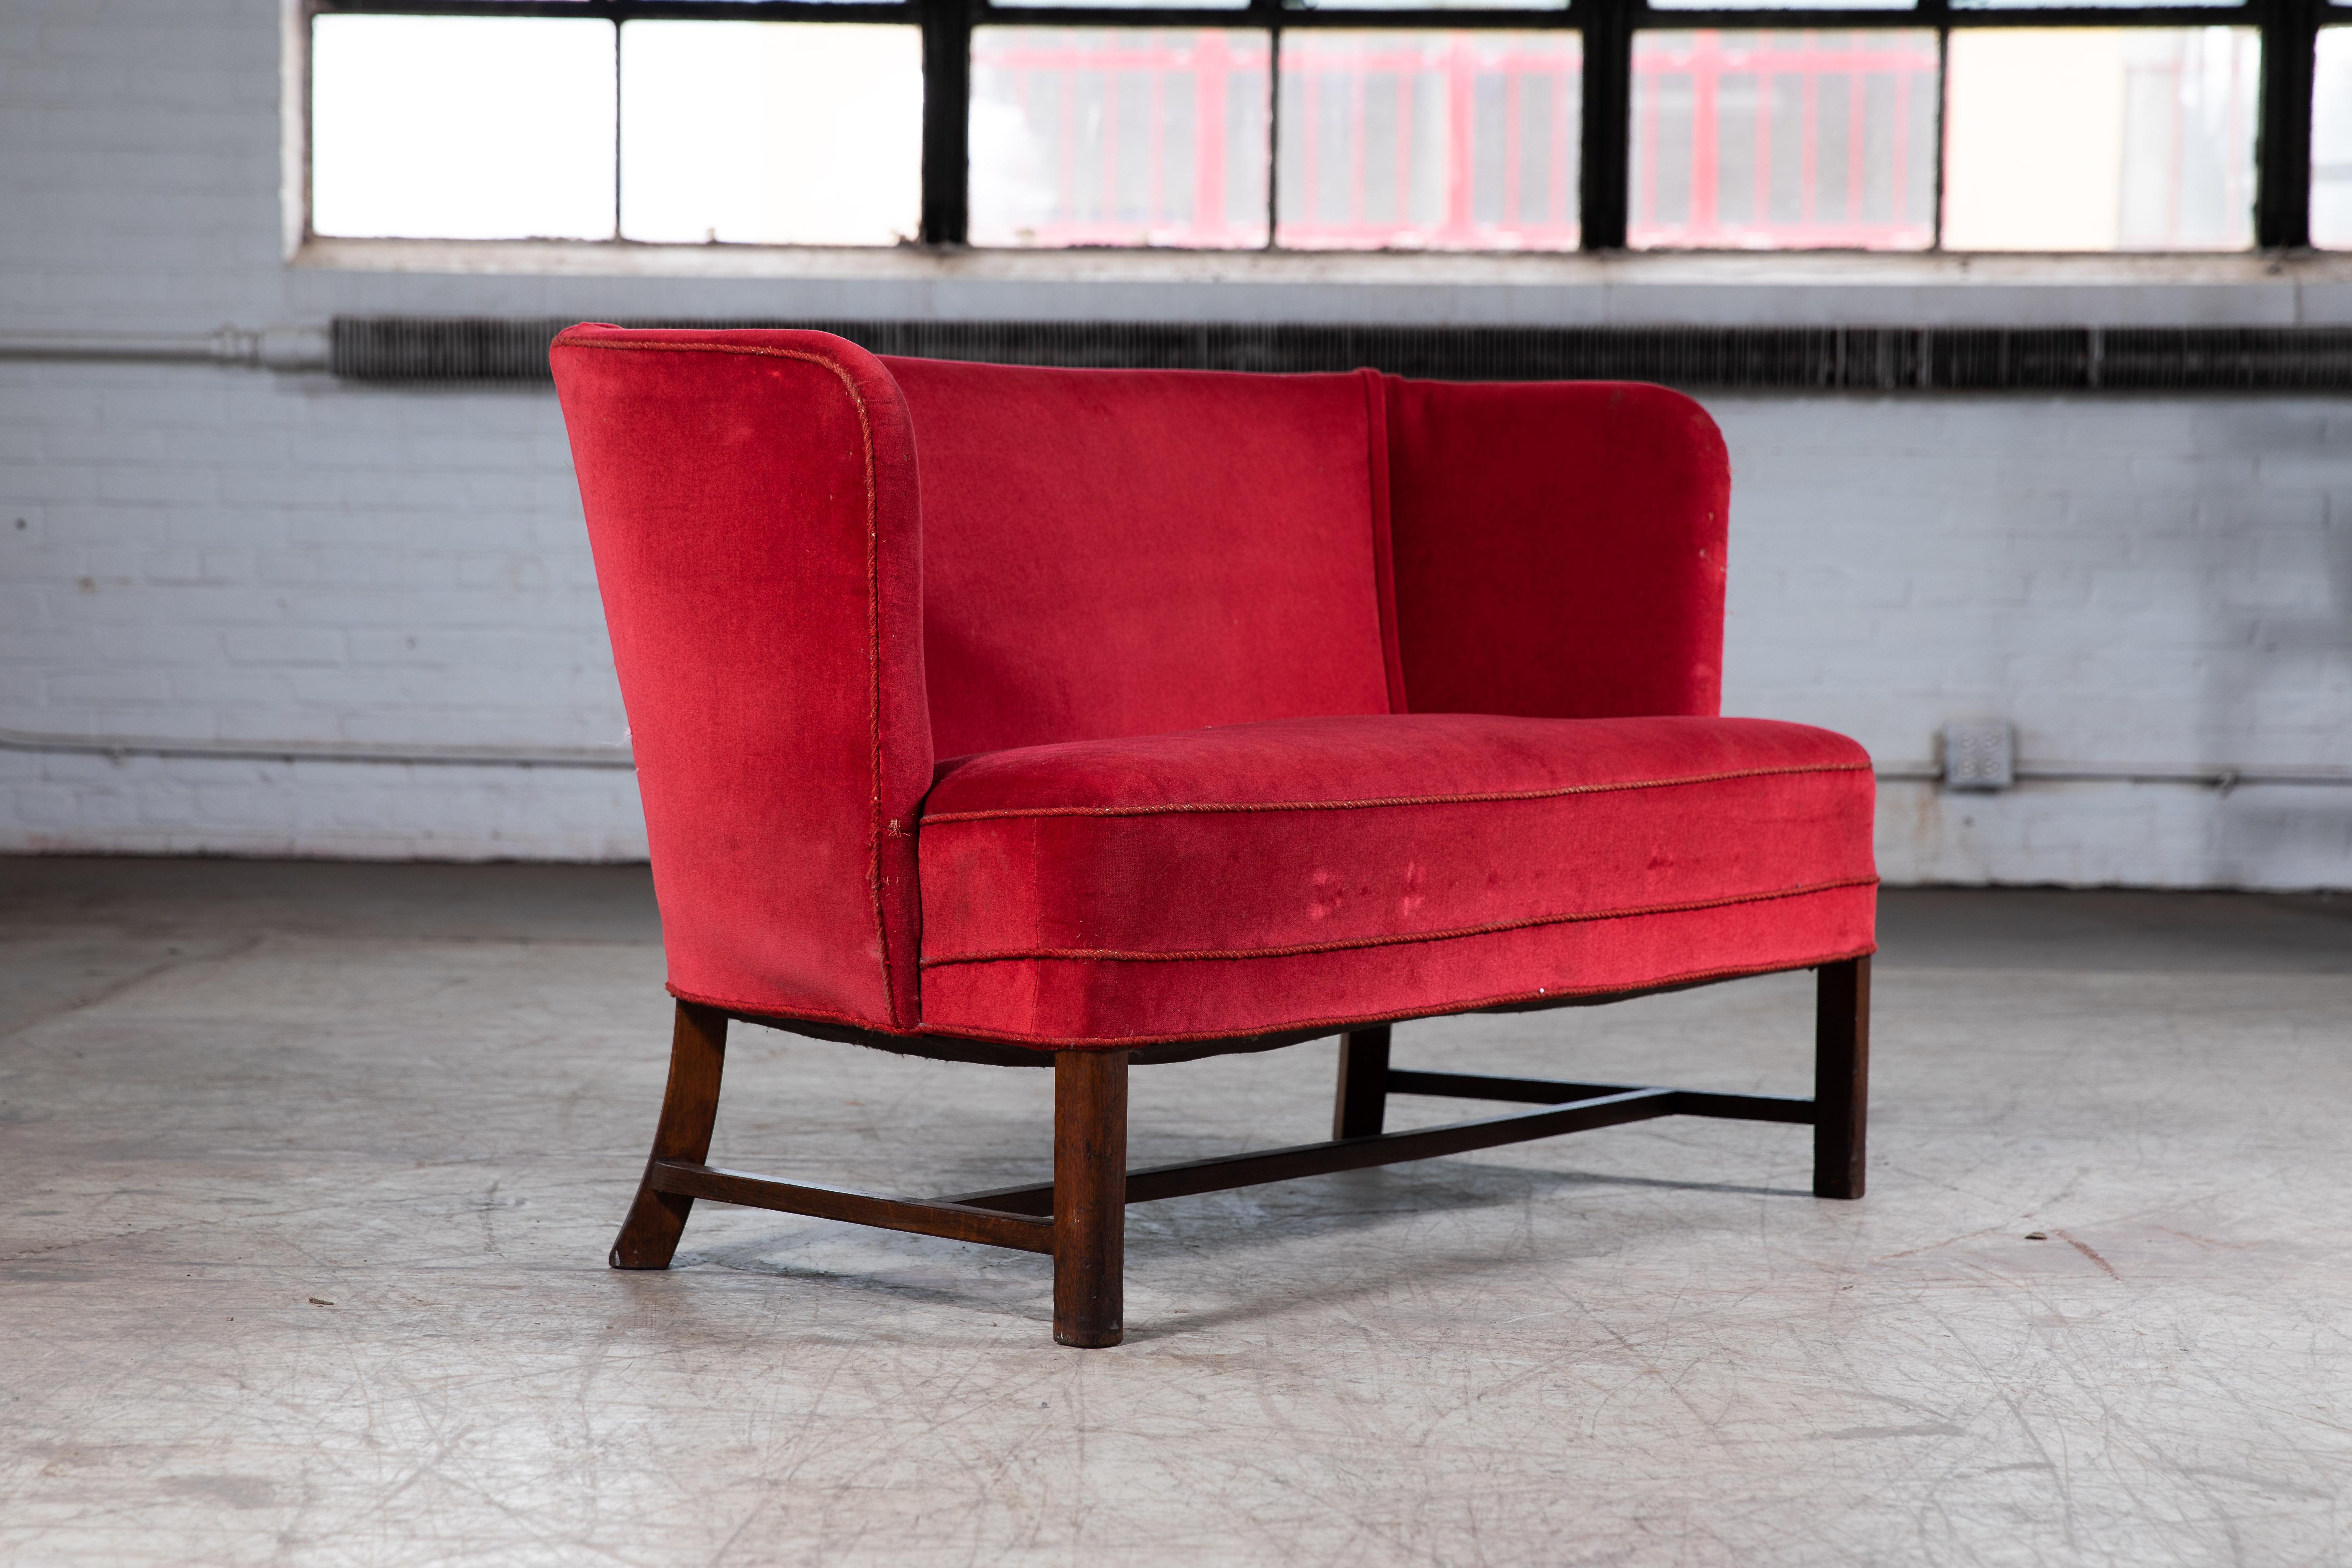 Classic, rare and very elegant Danish 1930s bench or settee in the style of Kaare Klint and Frits Henningsen. The settee is unmarked as was most often the case at the time it was produced, however, it shows many design cues reminiscent of Klint and